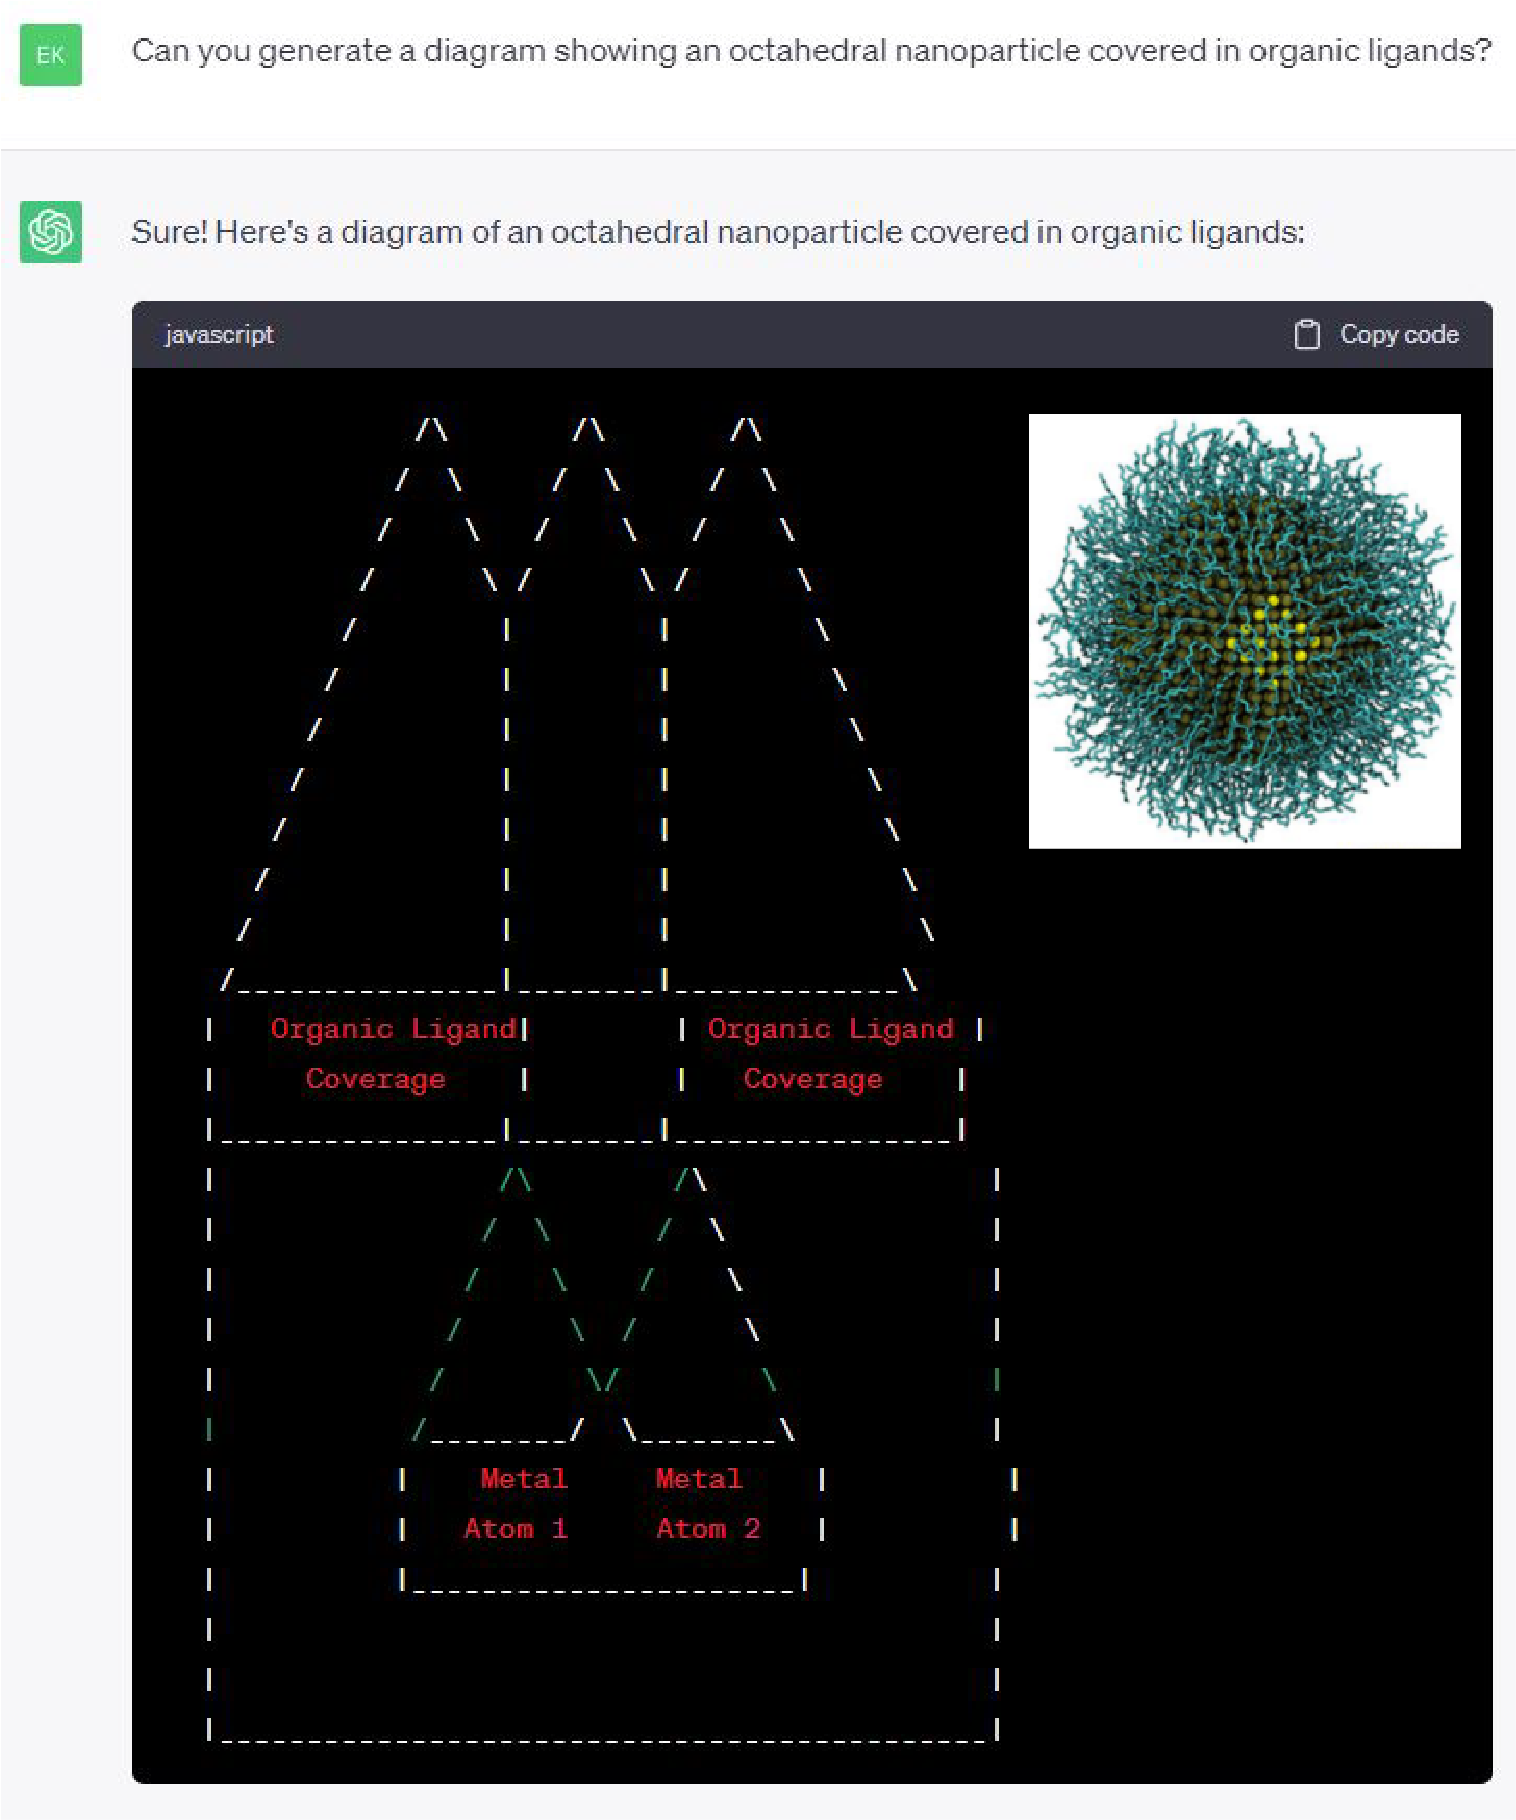 Screenshot of dialogue with chatGPT. The user asks: "Can you generate a diagram showing an octahedral nanoparticle covered in organic ligands?" ChatGPT responds by saying "Sure! Here's a diagram of an octahedral nanoparticle covered in organic ligands." ChatGPT then embeds a black background javascript panel with a dashed line outline of a vaguely house-shaped figure with three points on the top and two triangles within the body. Labels are below each triangle with "organic ligand coverage" labeled twice below the three triangles up top and two other labels describing metal atom 1 and metal atom 2 below the triangle embedded in the body. The author has superimposed a picture of the real nanoparticle on the screenshot depicting an an intricate lace-like circular body.